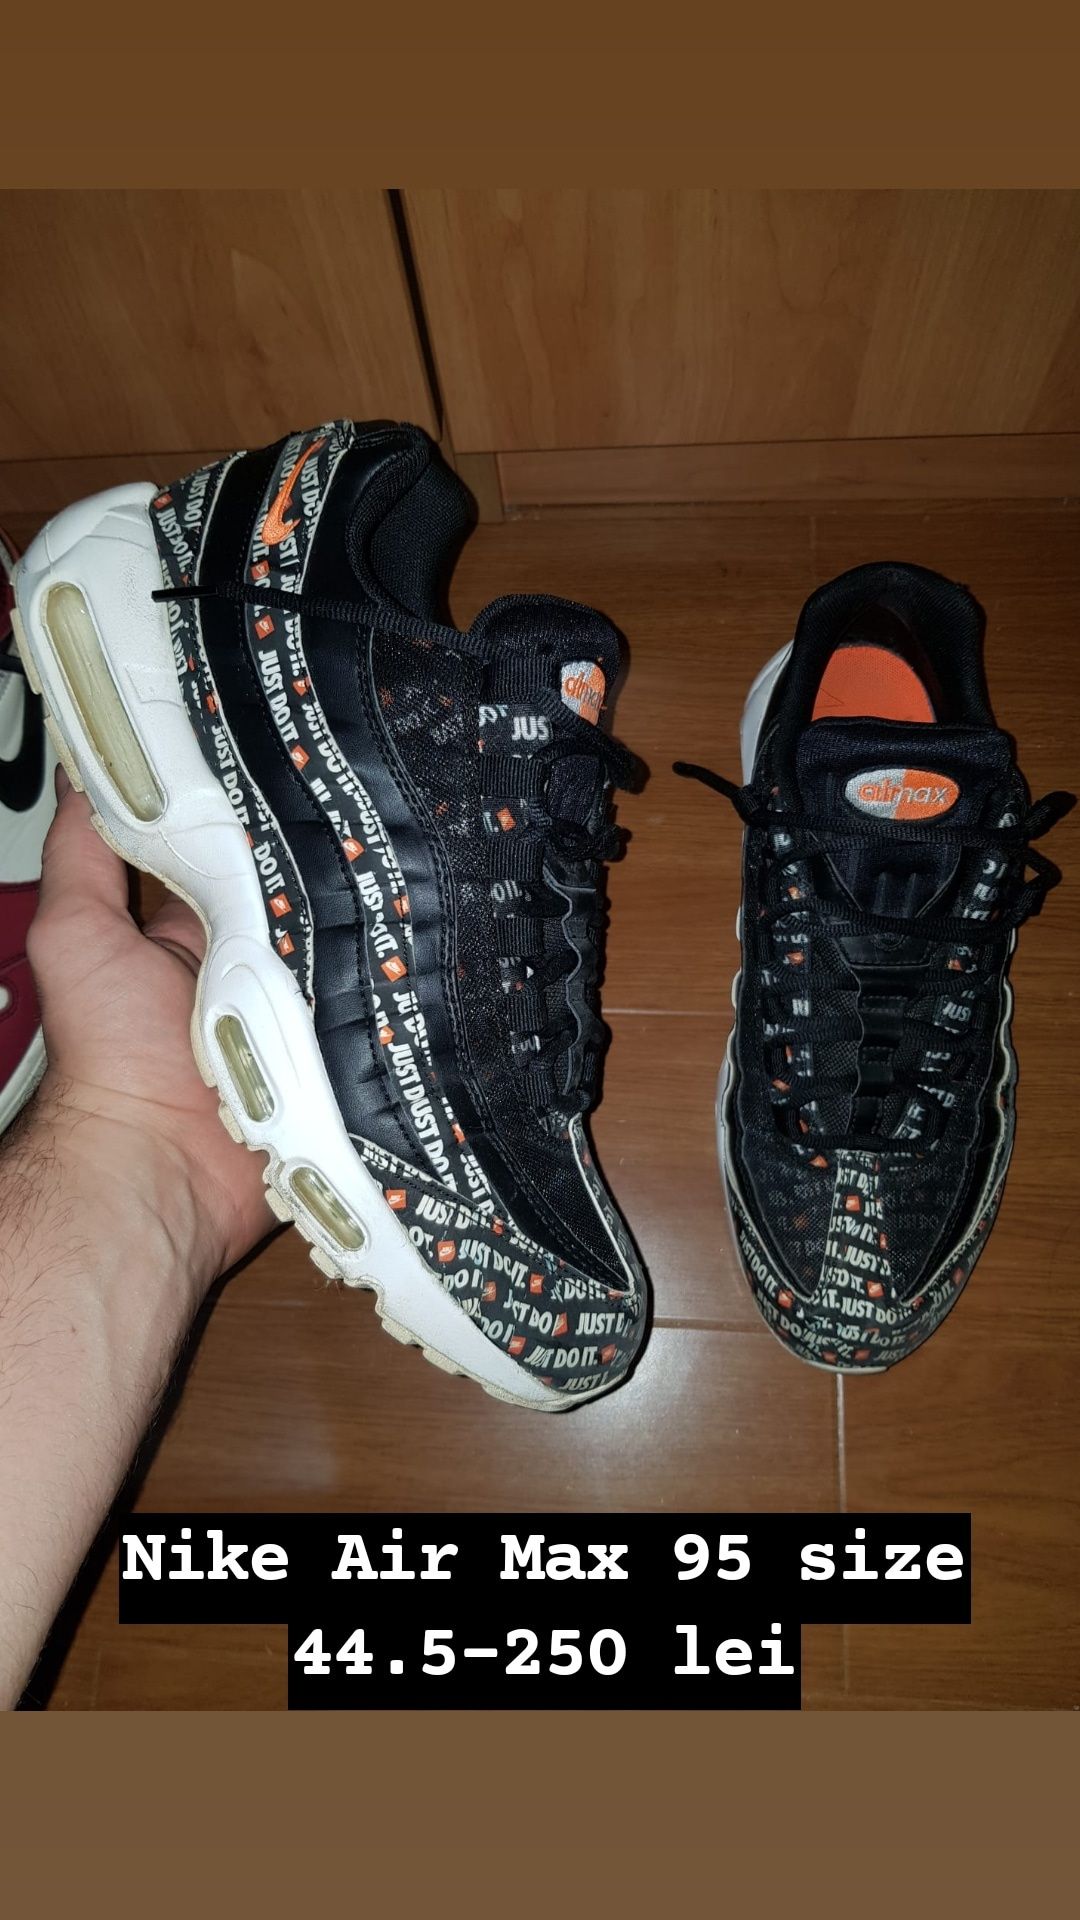 Nike Air Max 95 just do it